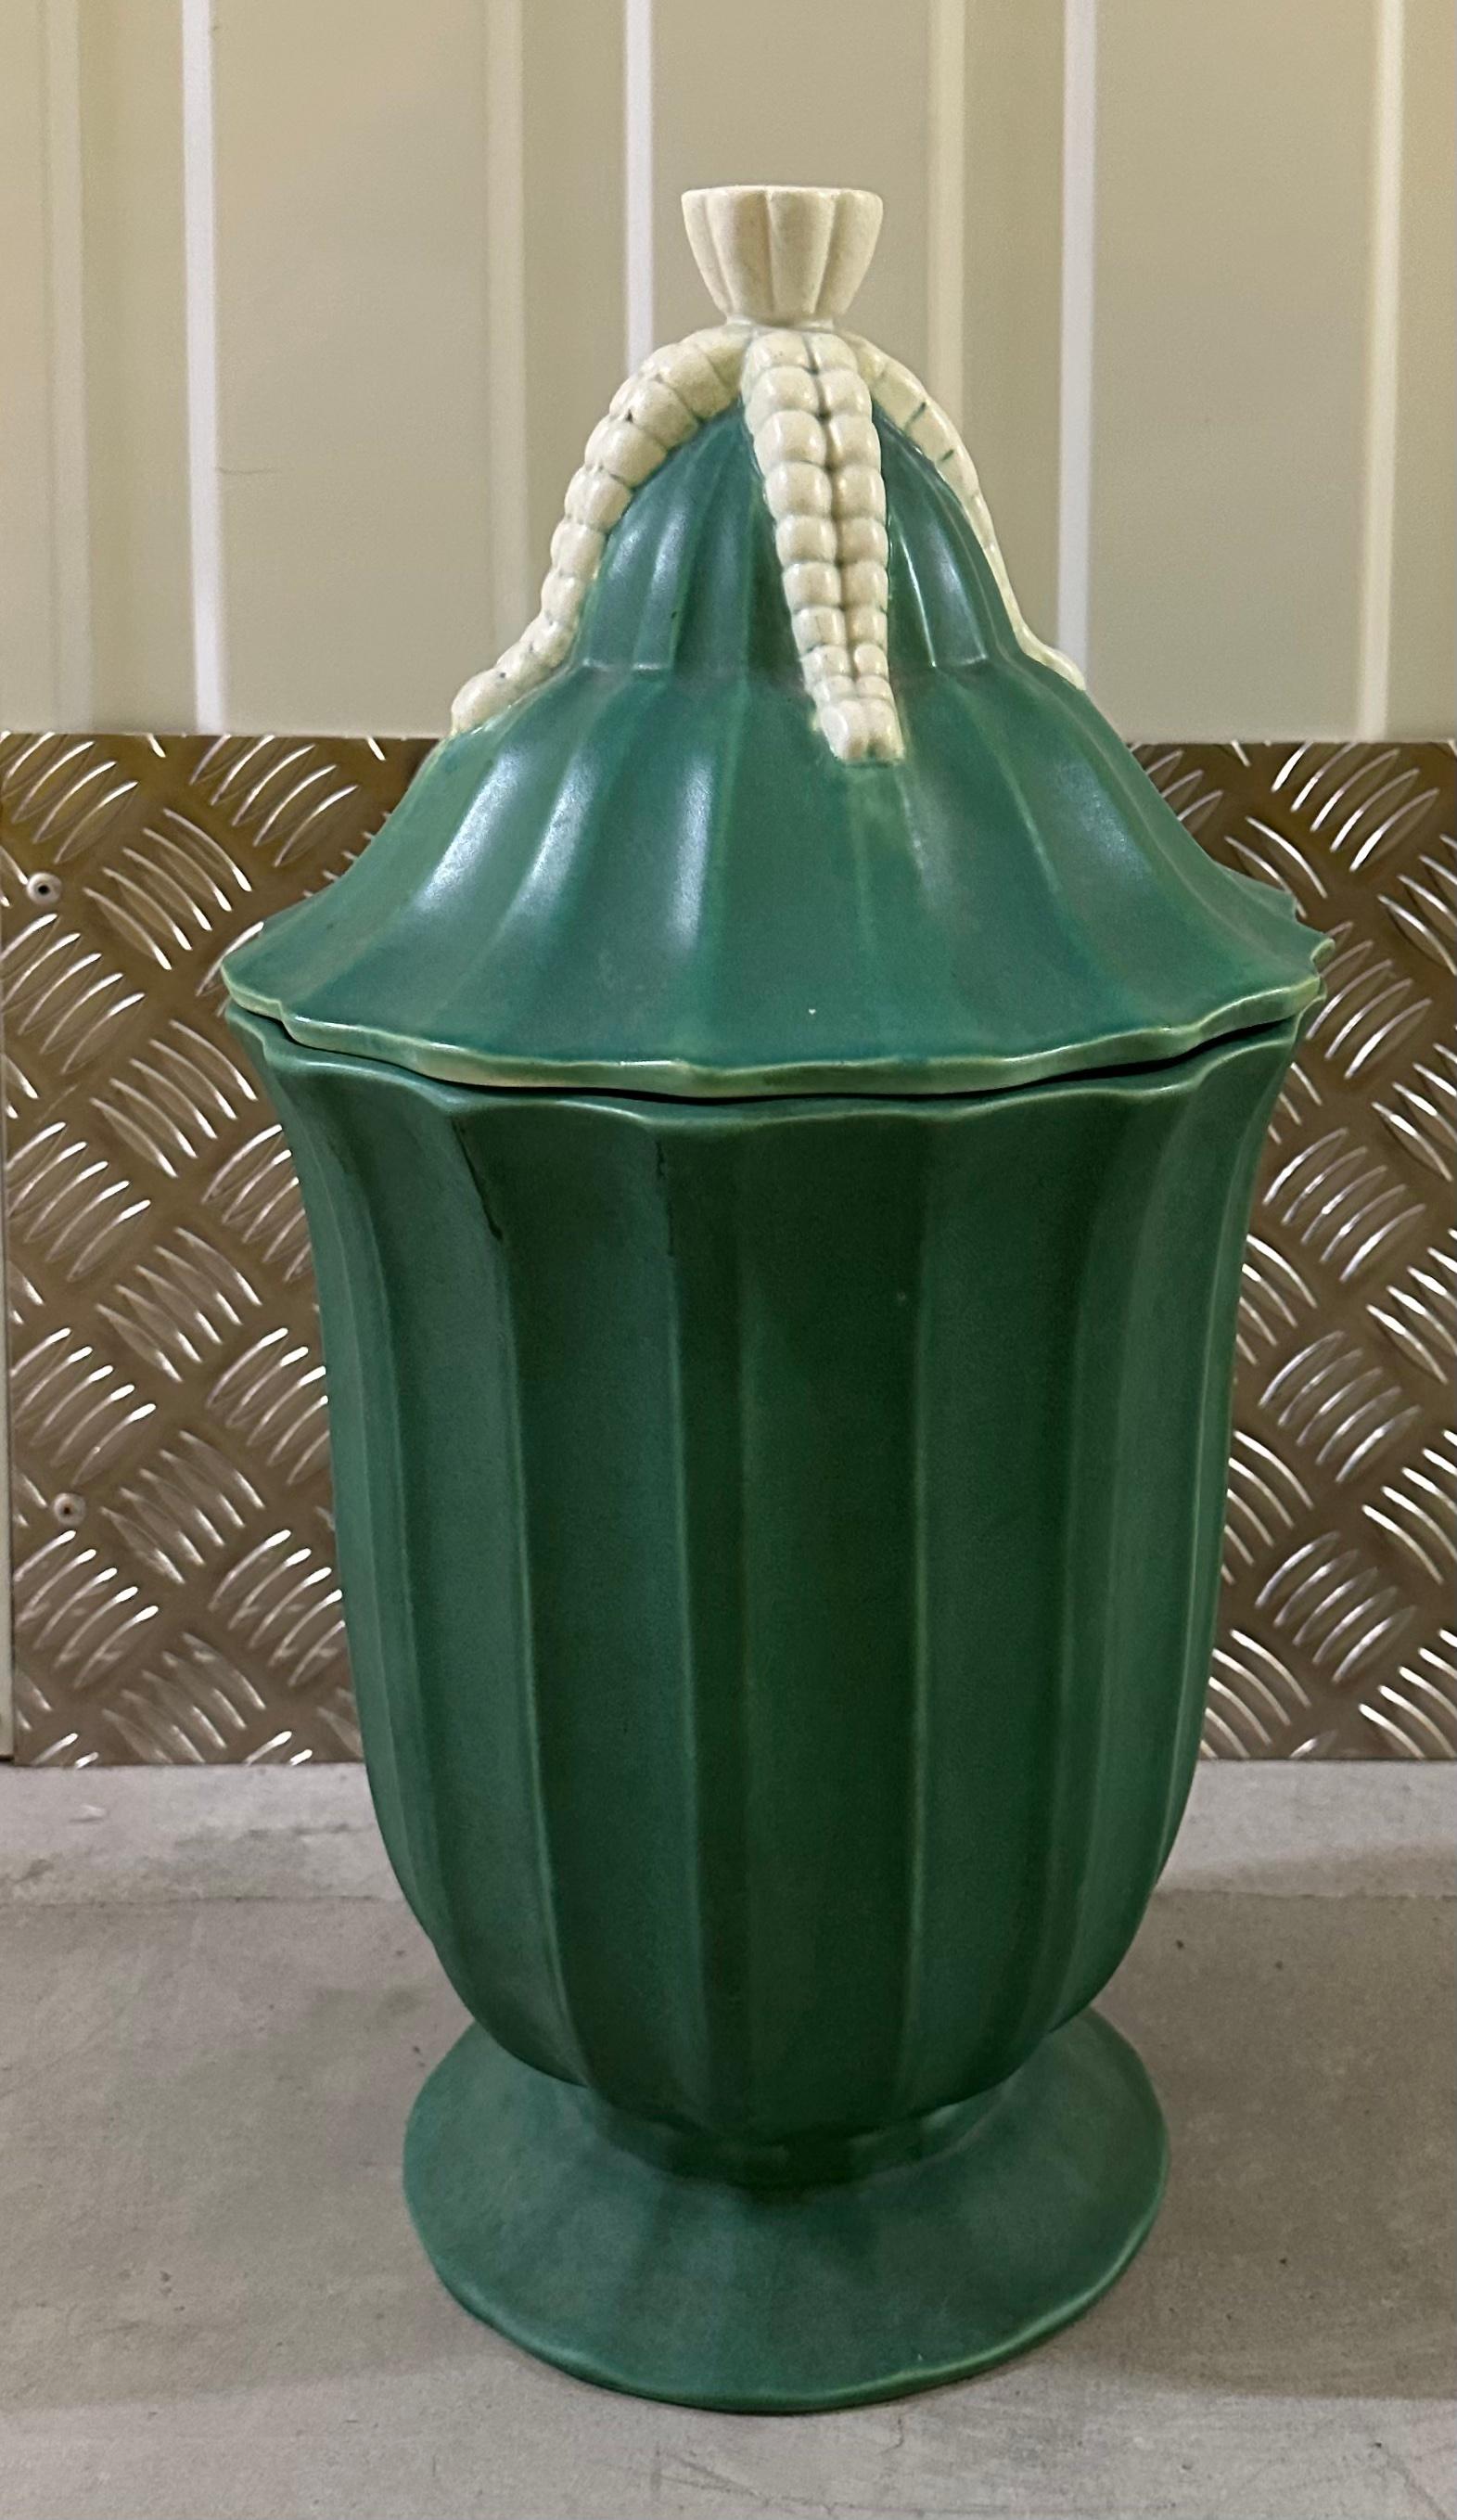 Gio Ponti
Teal-coloured lidded vase/Urn  5756
Inscribed at the bottom '695T'

Expertise conducted by the Gio Ponti Archives

The vase is in great condition. It only has a microfissure at the bottom.